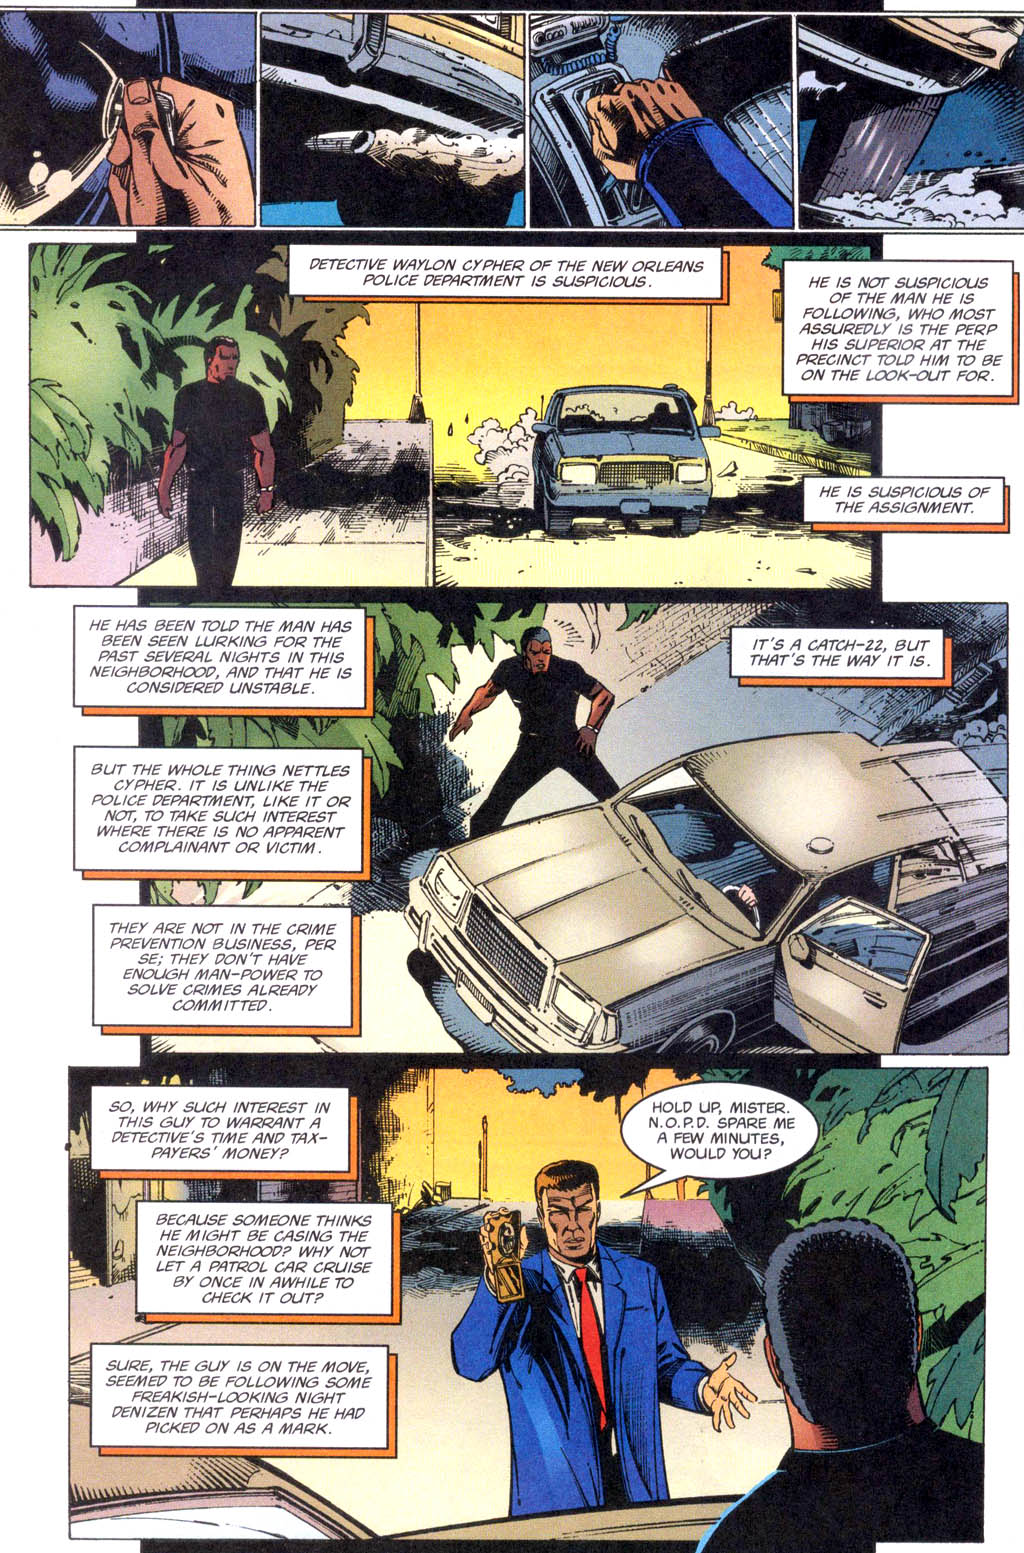 Blade (1998) 3 Page 8